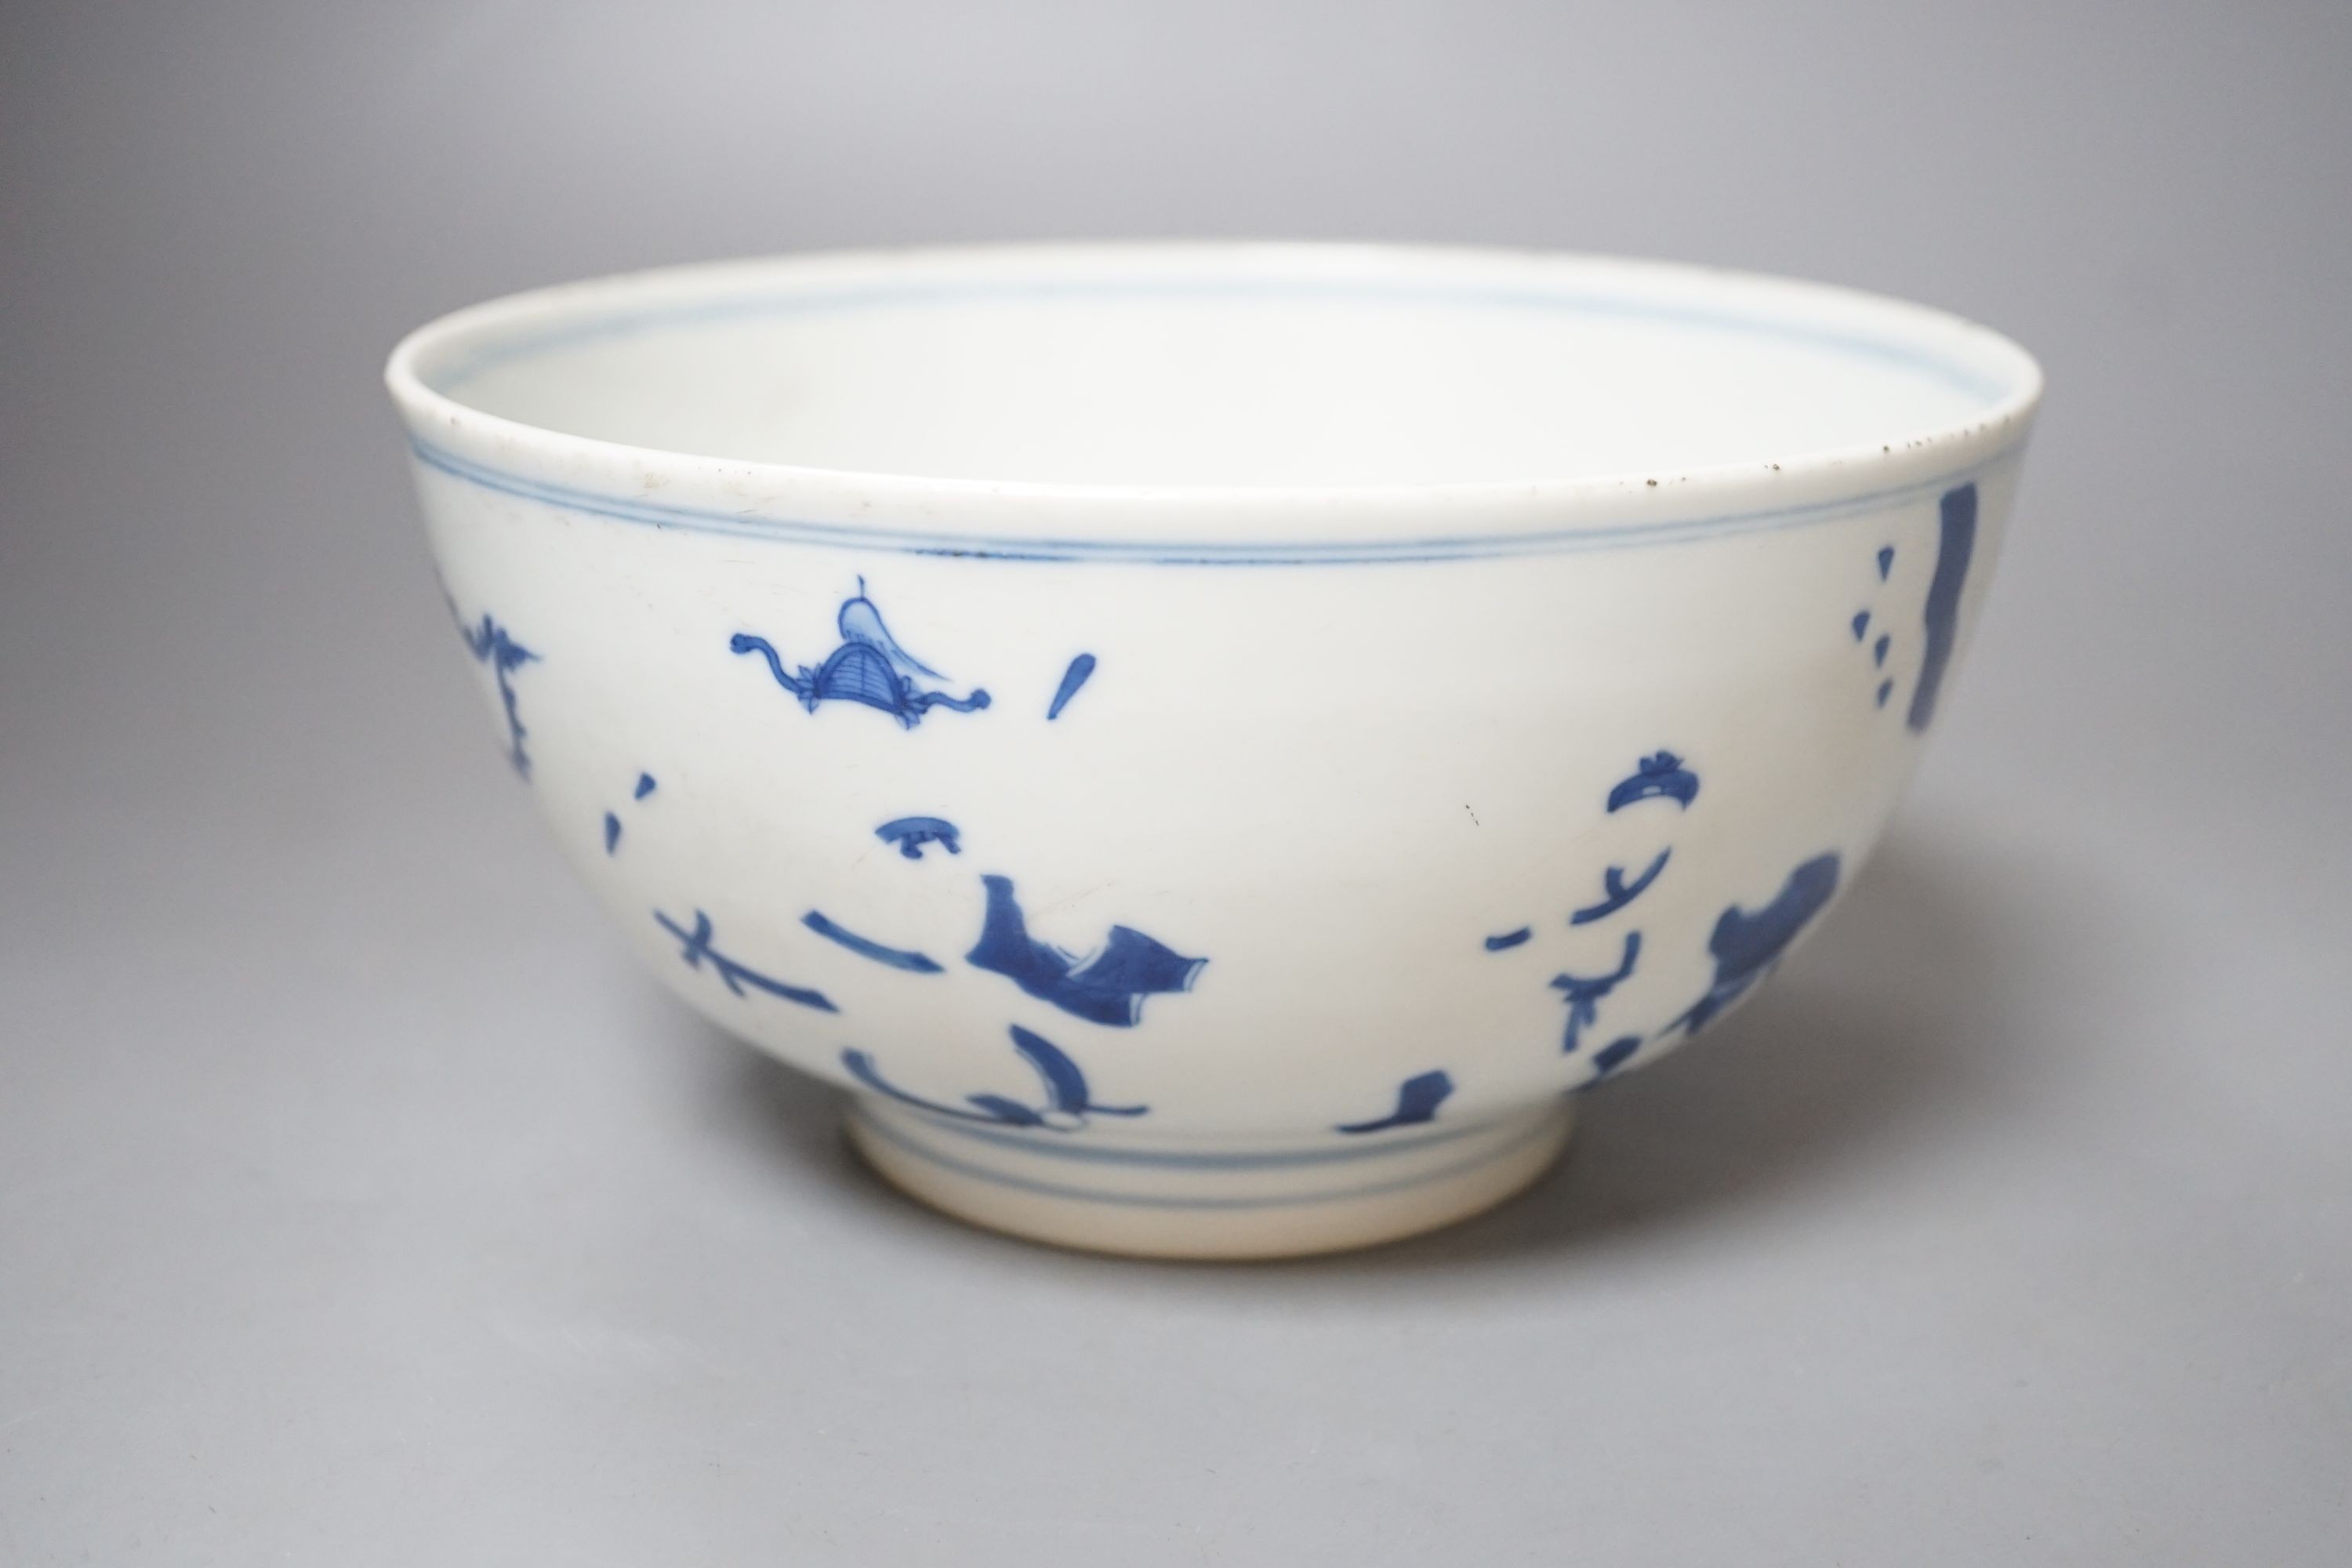 A Chinese blue and white bowl, diameter 16.5cm